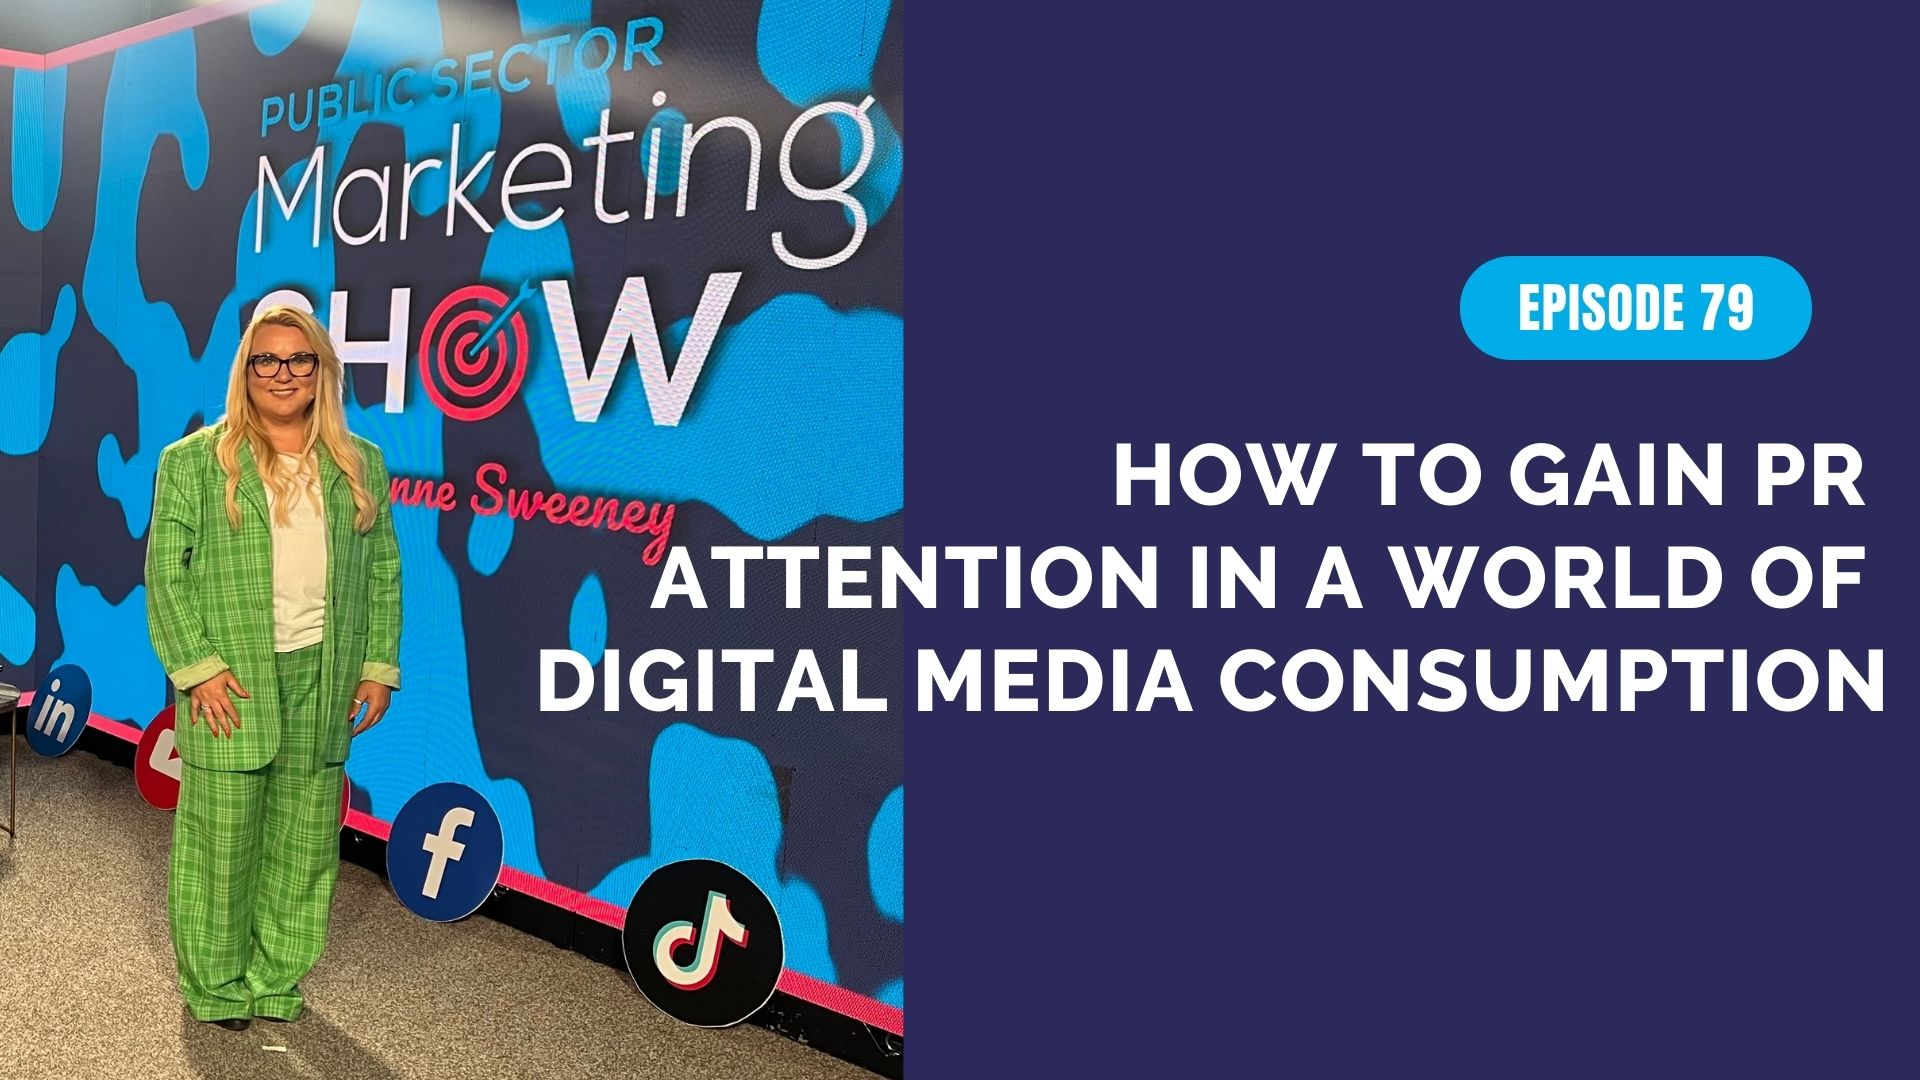 How to Gain PR Attention in a World of Digital Media Consumption